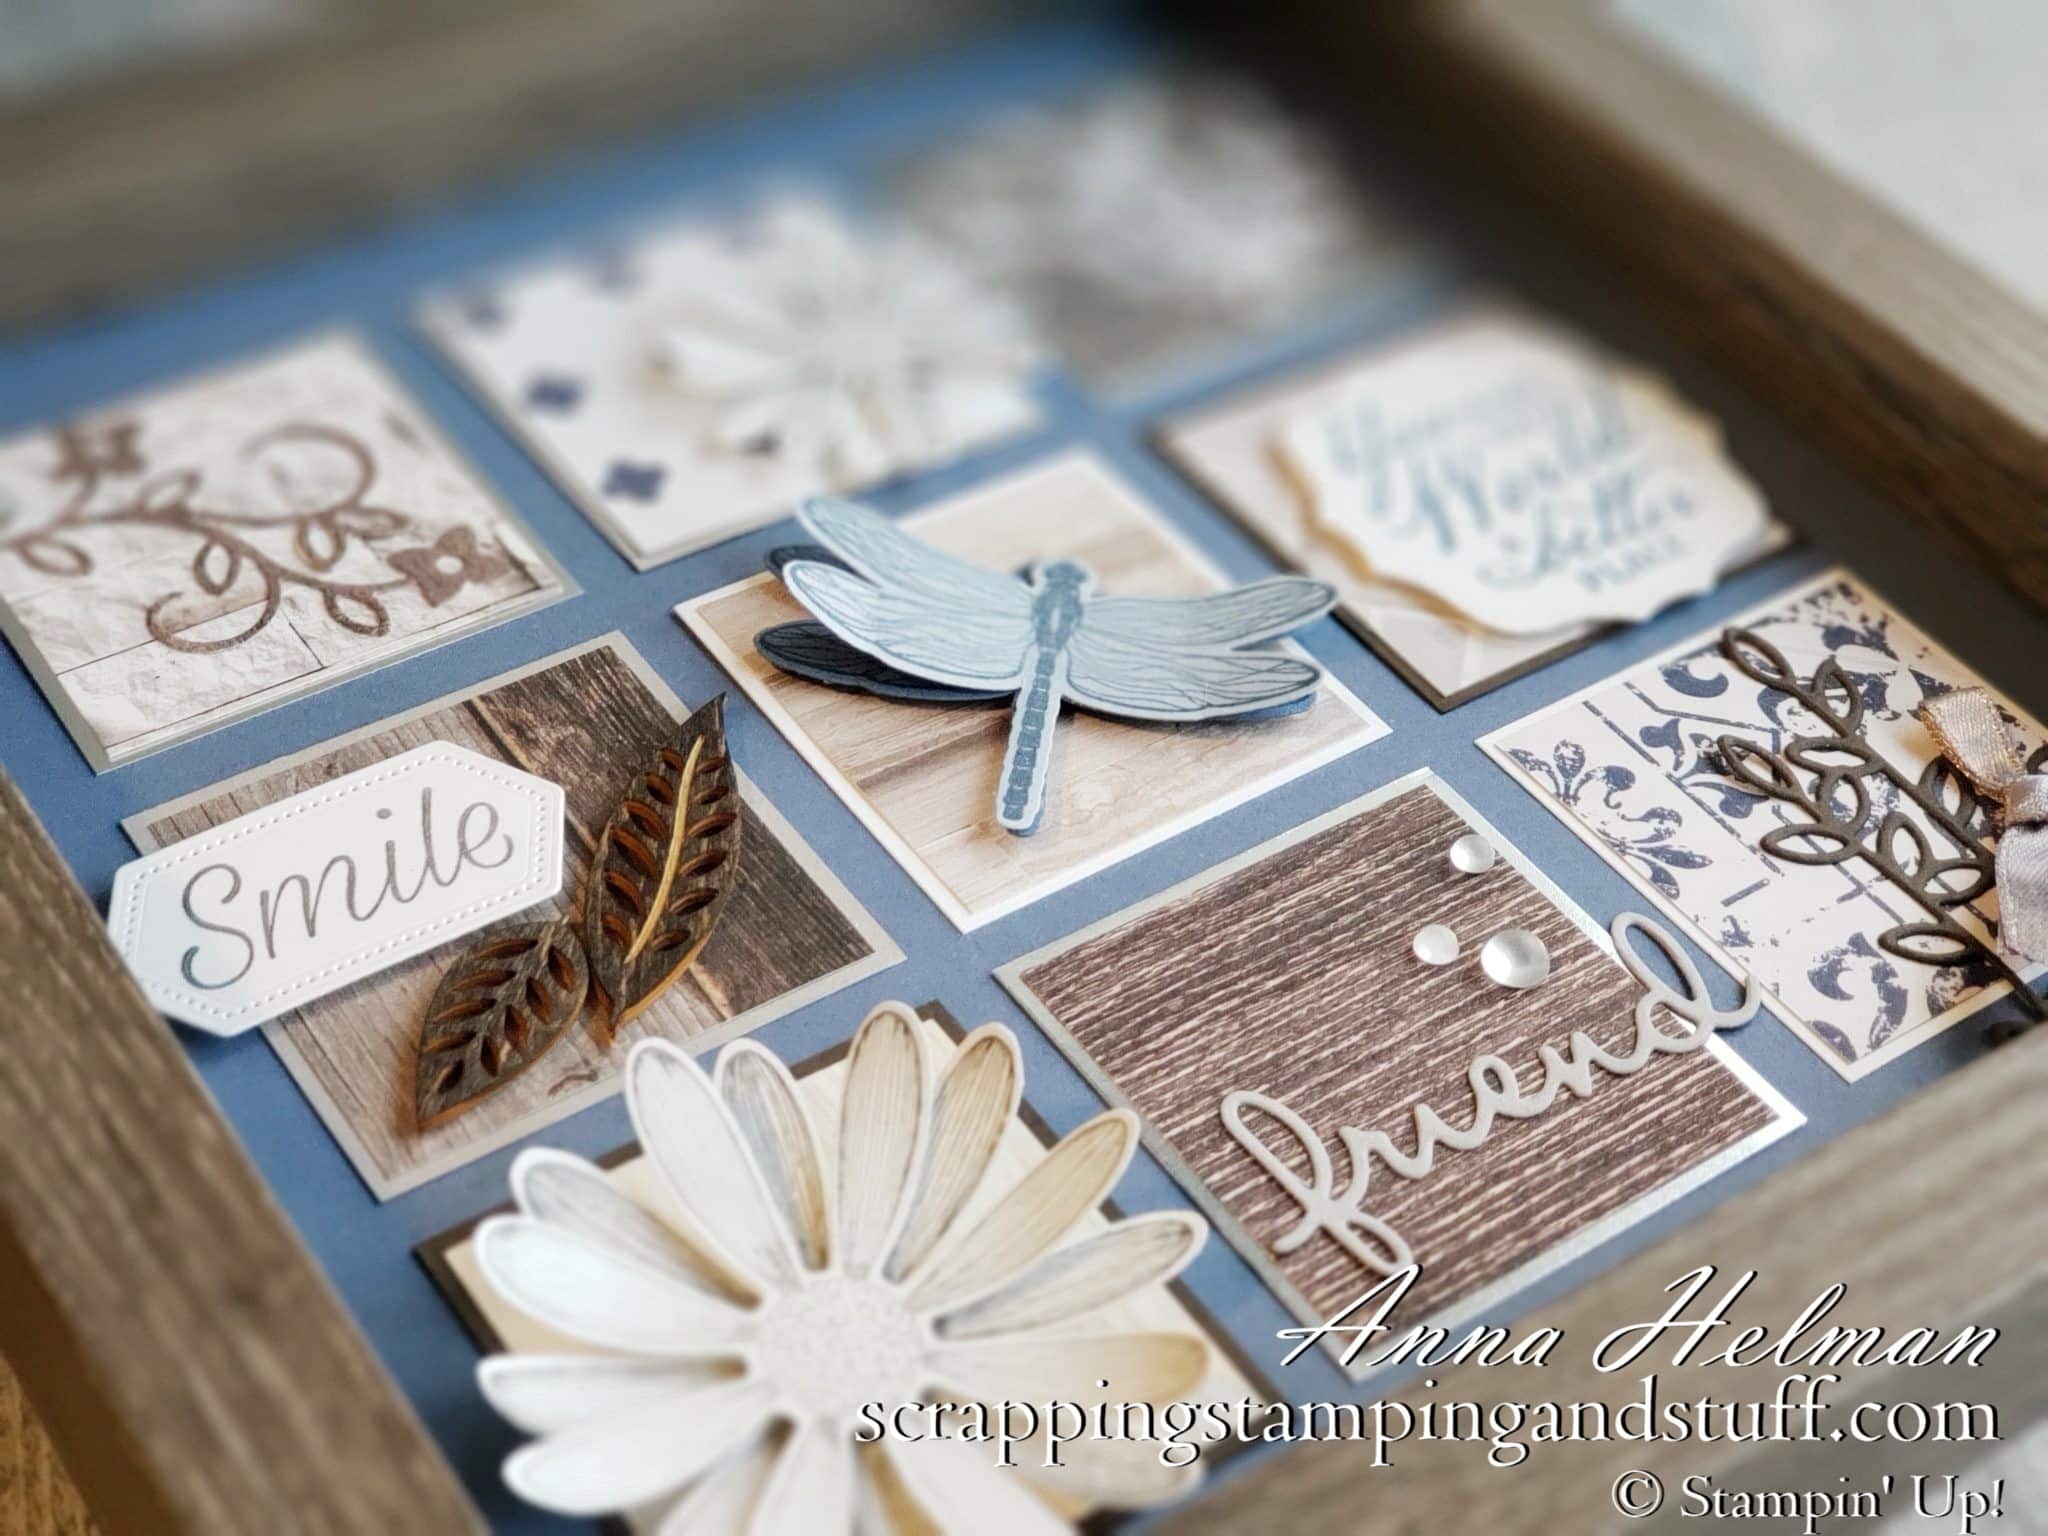 Shadow Box Sampler – Day 4 of 12 Days of DIY Gift Ideas